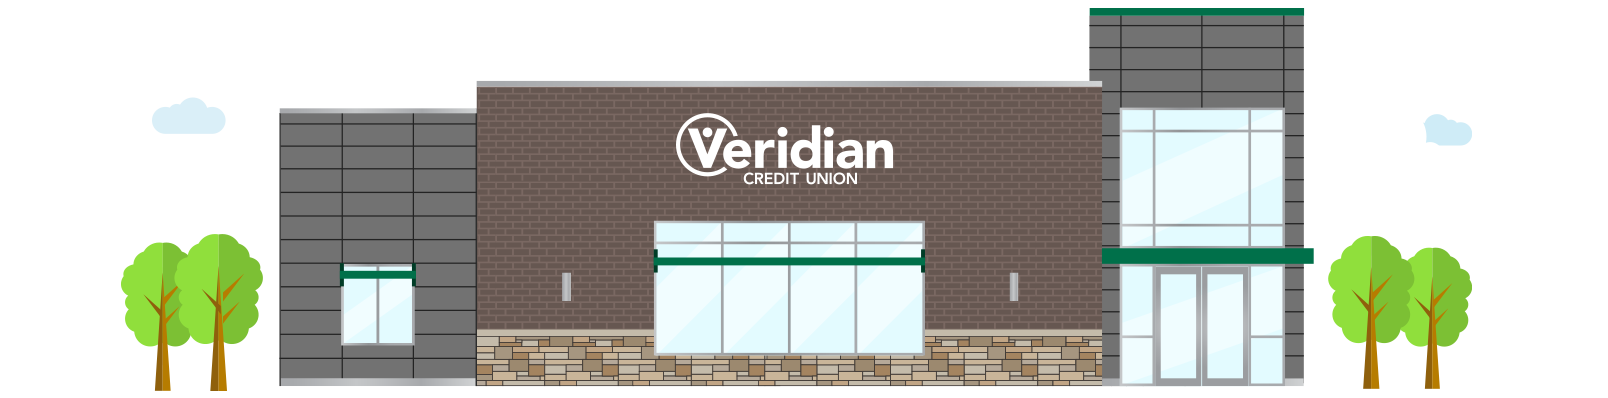 Image of Veridian Branch